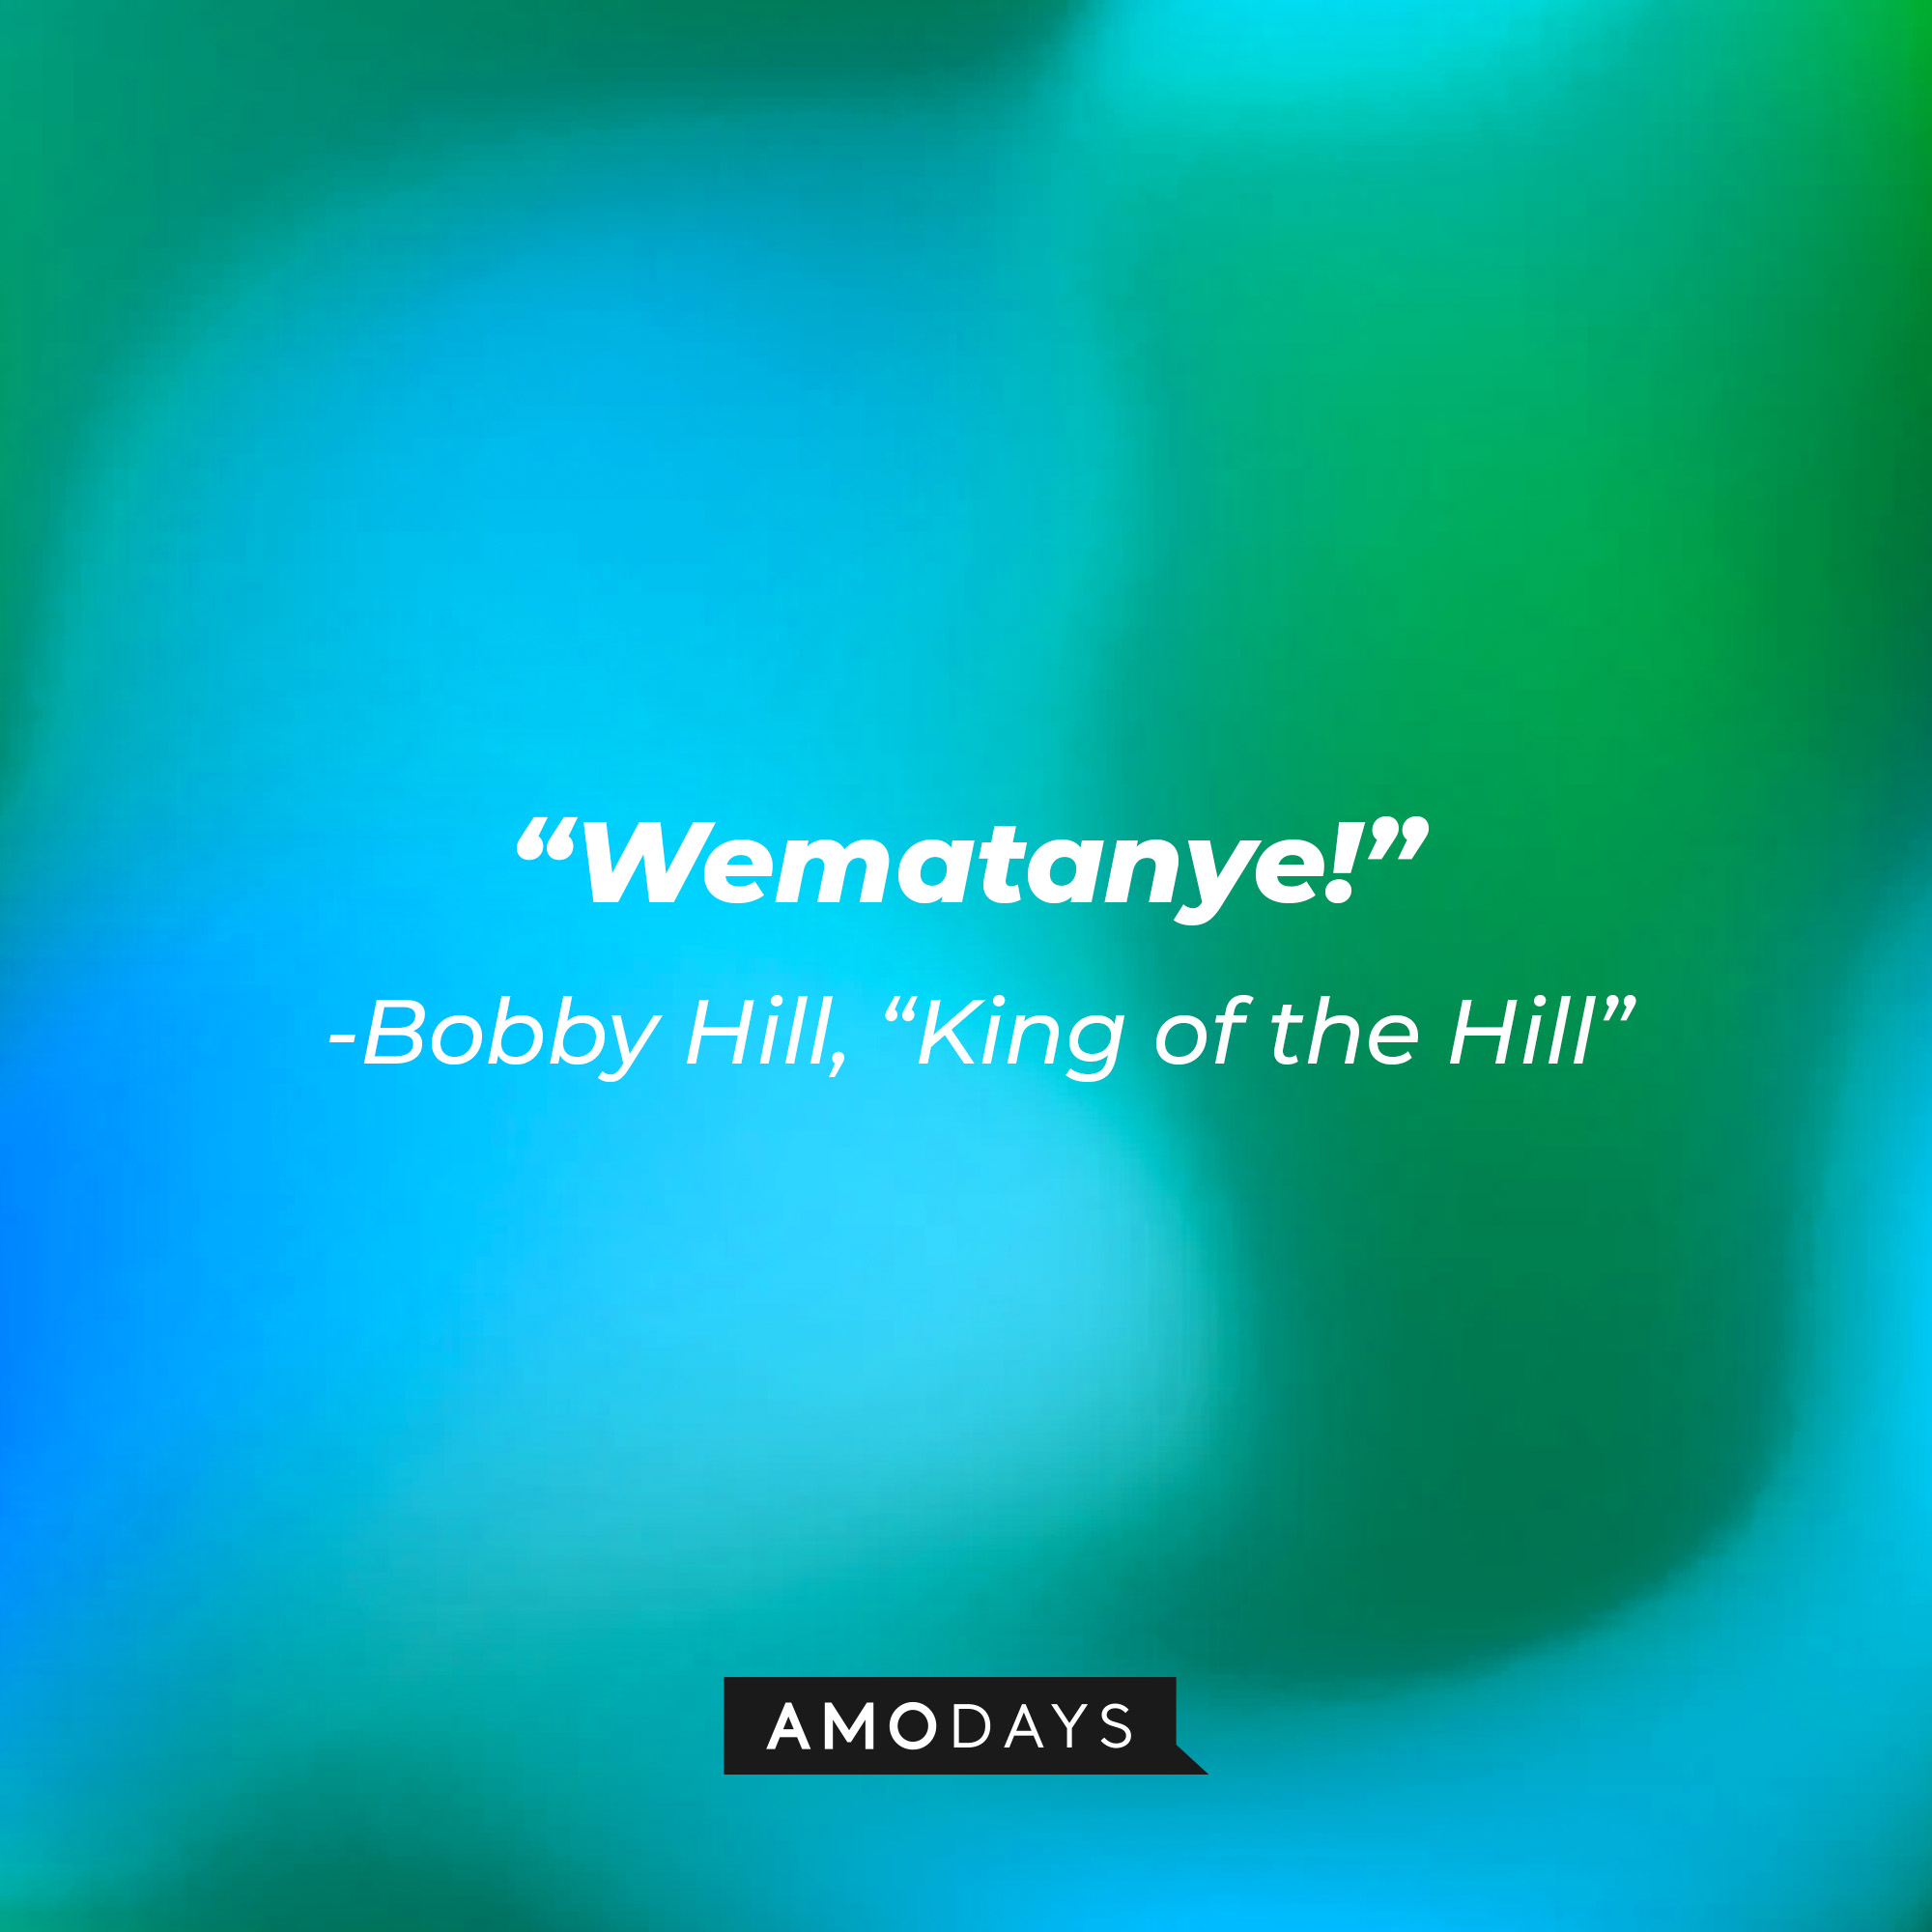 Bobby Hill with his quote, "Wematanye!" | Source: facebook.com/kingofthehillfan